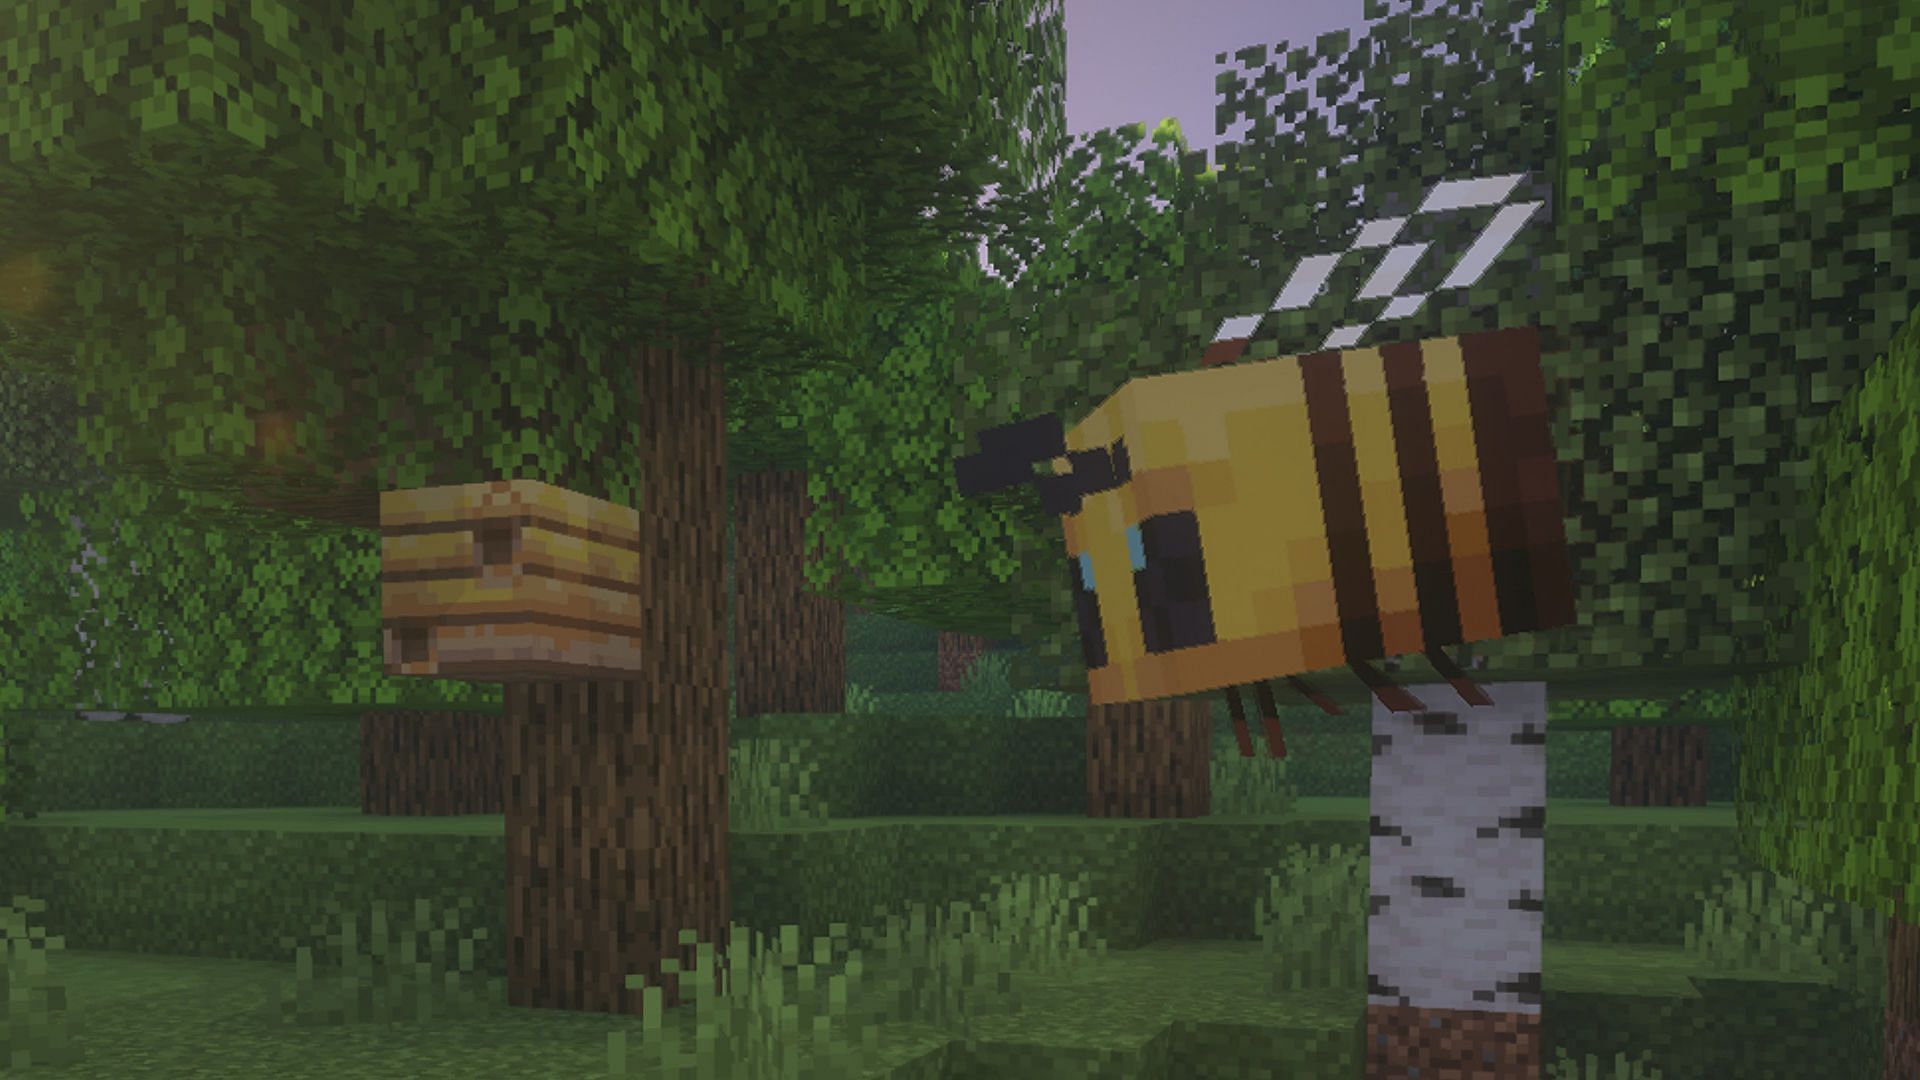 Players will need flowers to attract bees (image via Mojang)